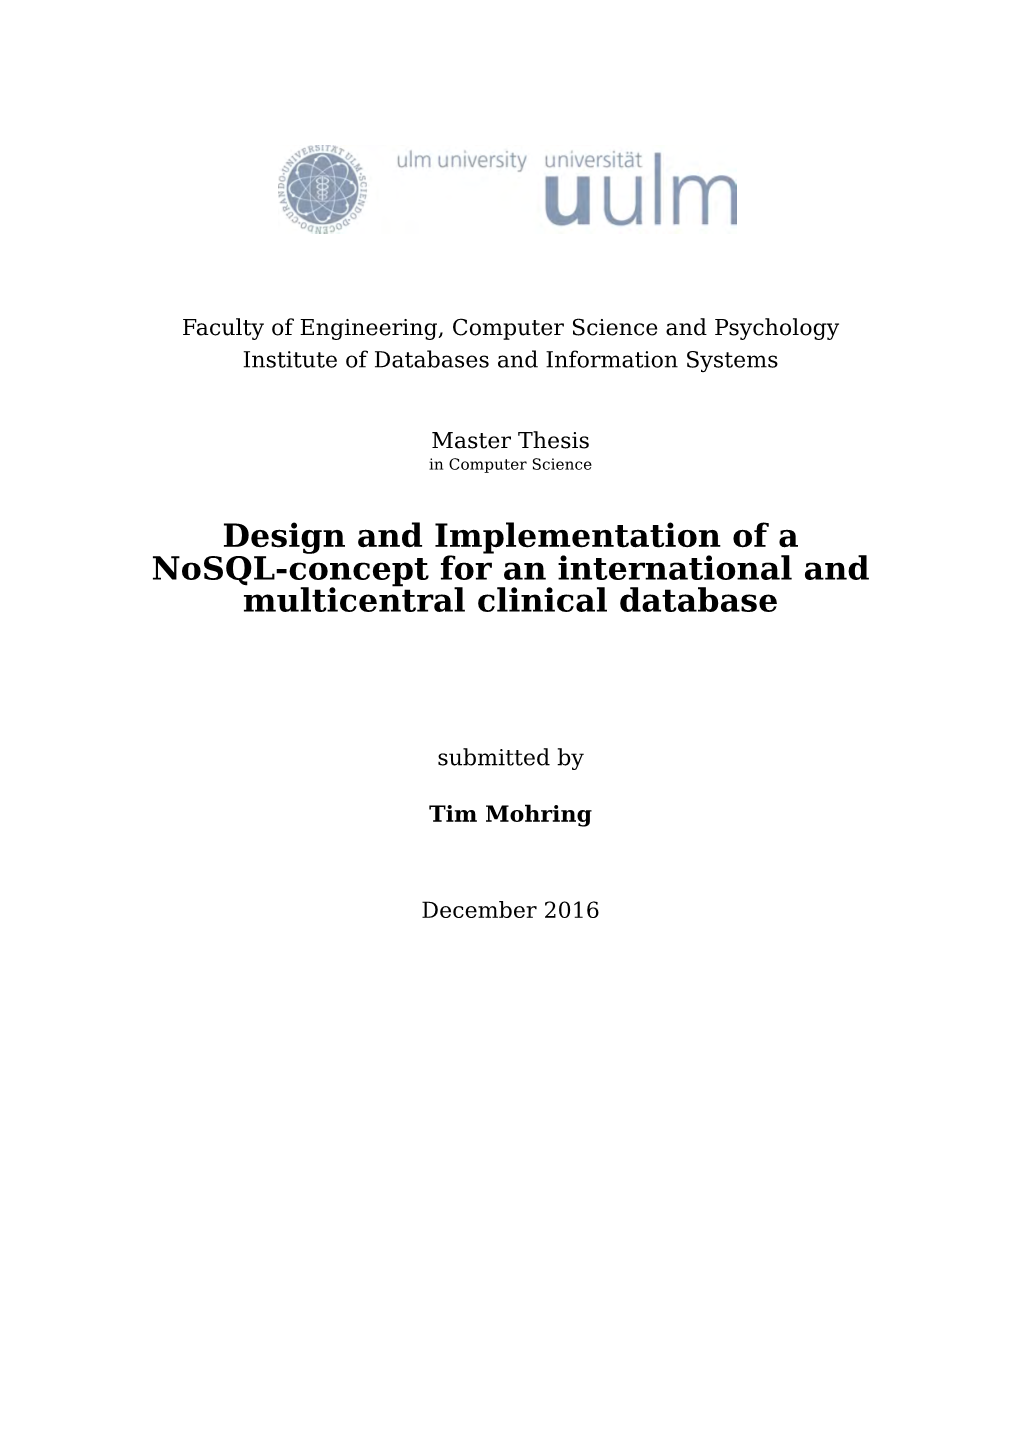 Design and Implementation of a Nosql-Concept for an International and Multicentral Clinical Database